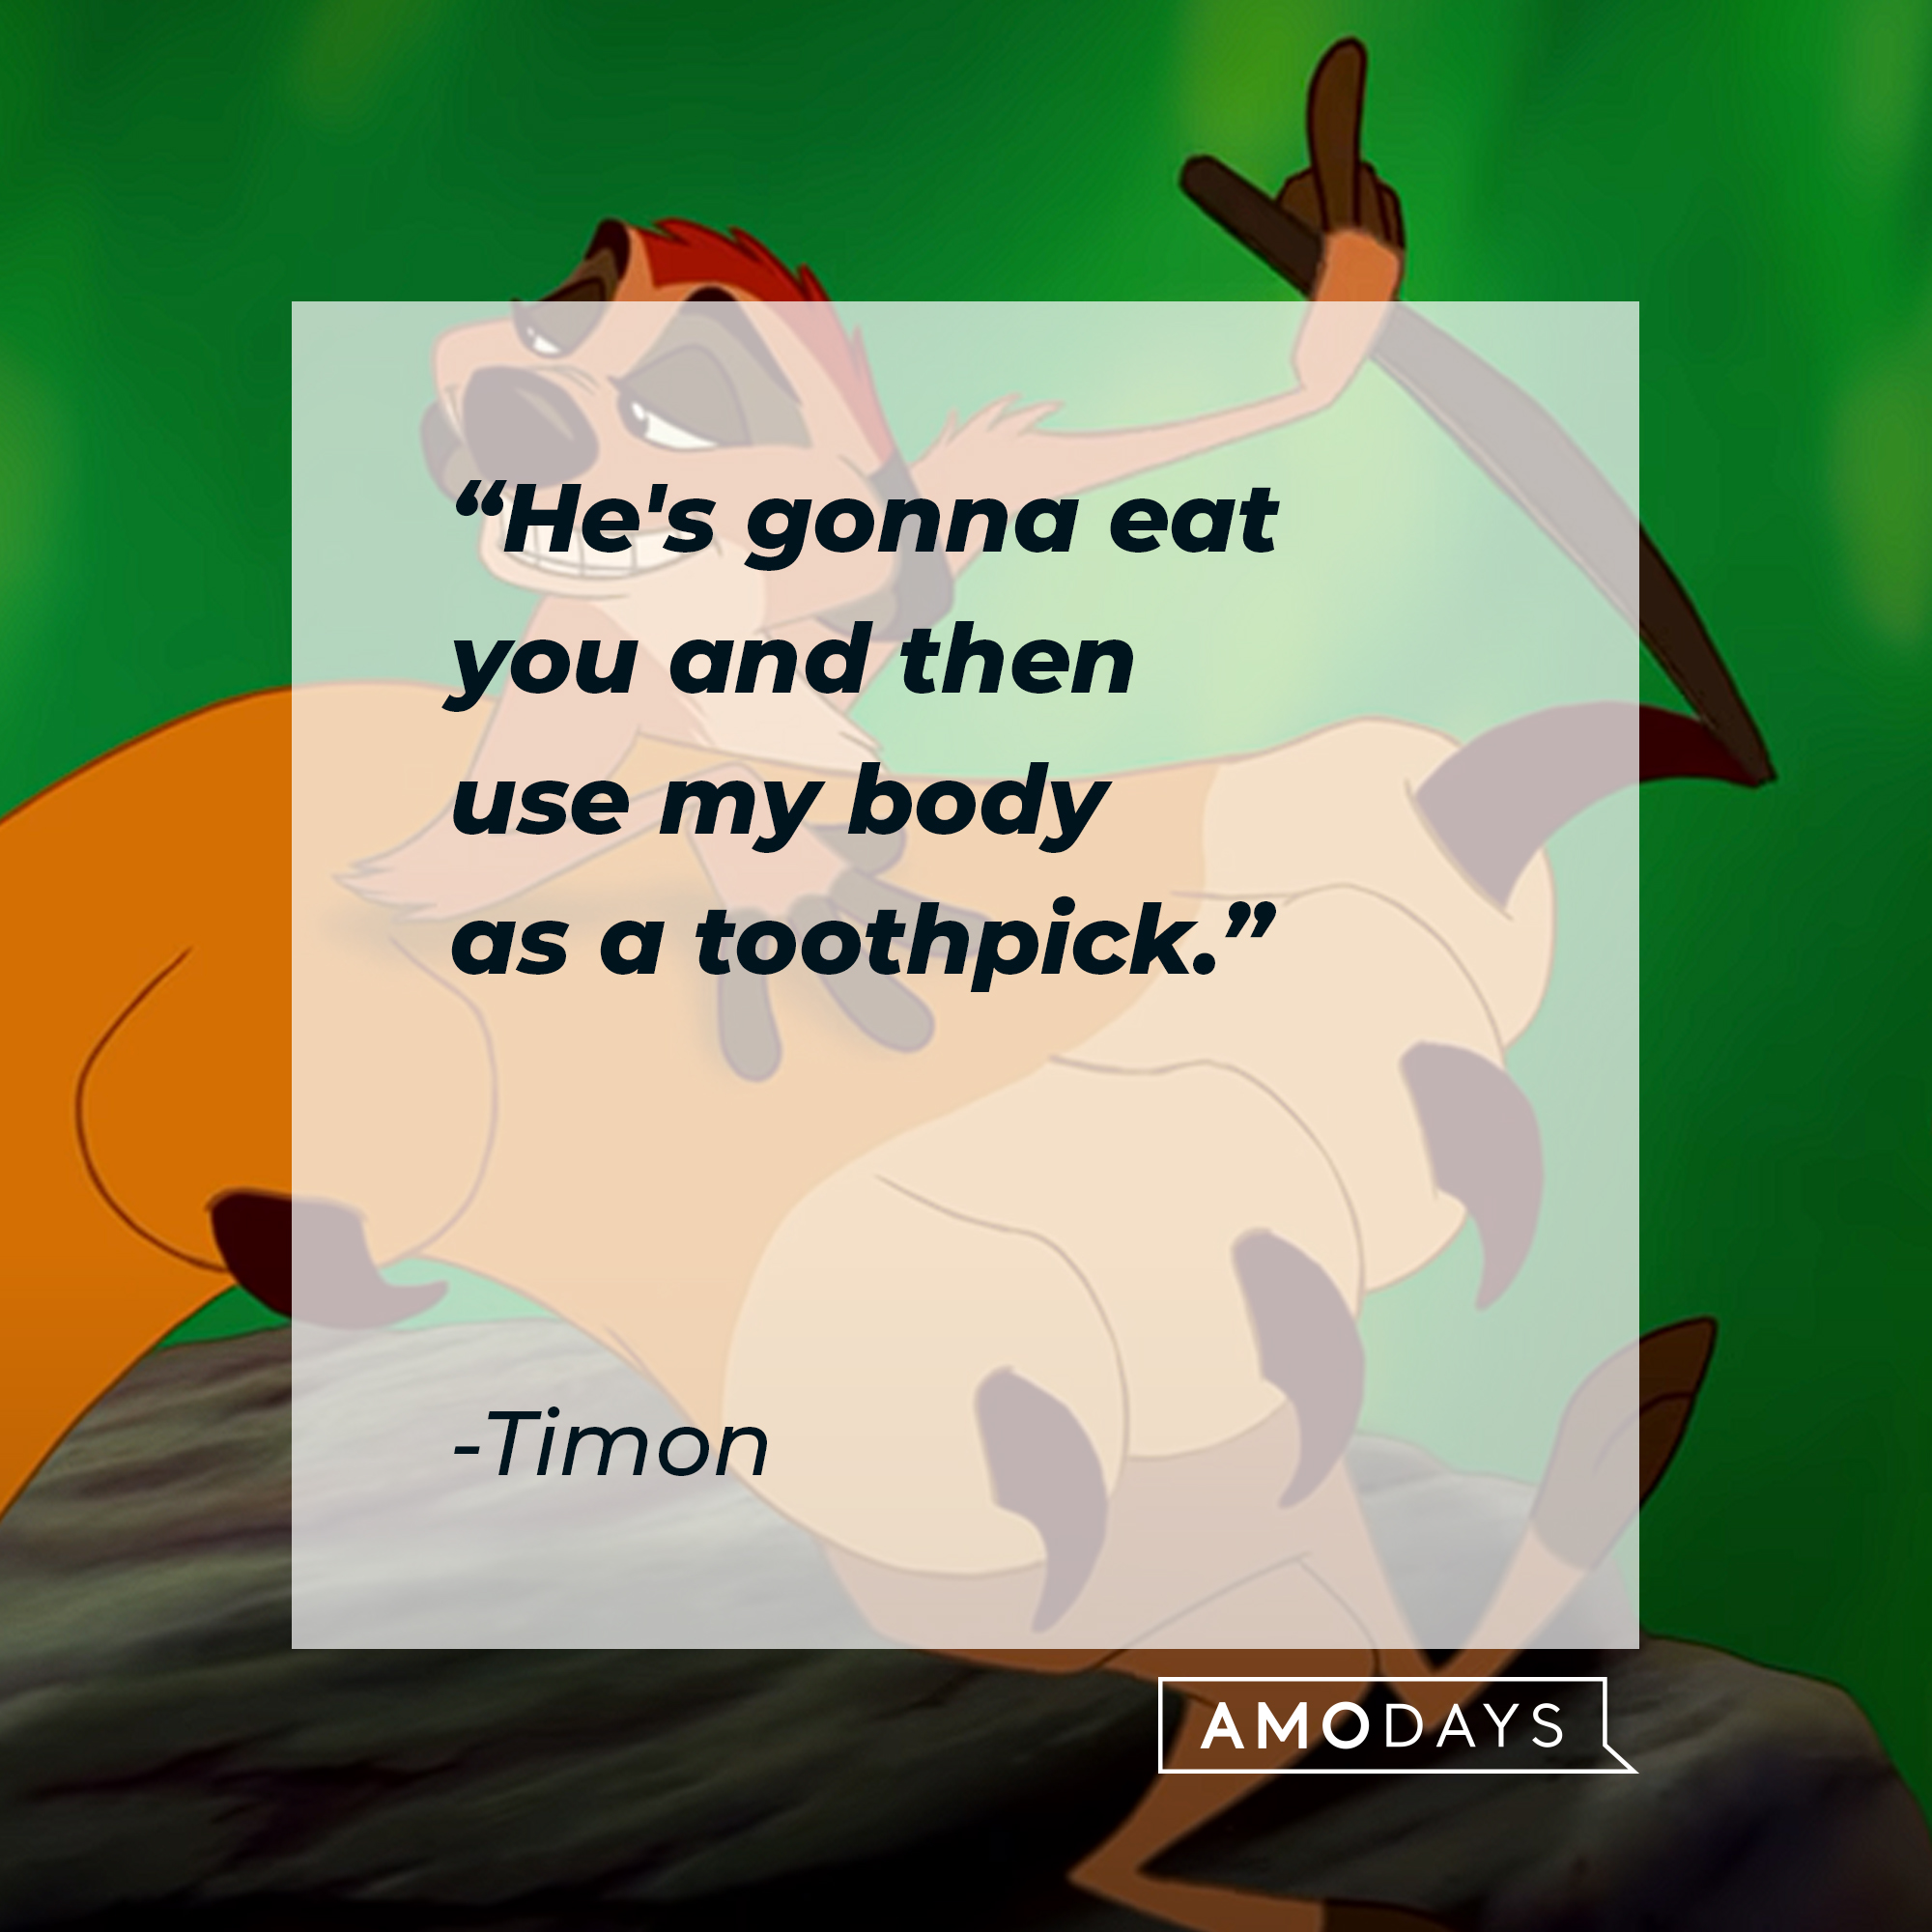 Timon, with his quote: “He's gonna eat you and then use my body as a toothpick.” | Source: youtube.com/disneyfr